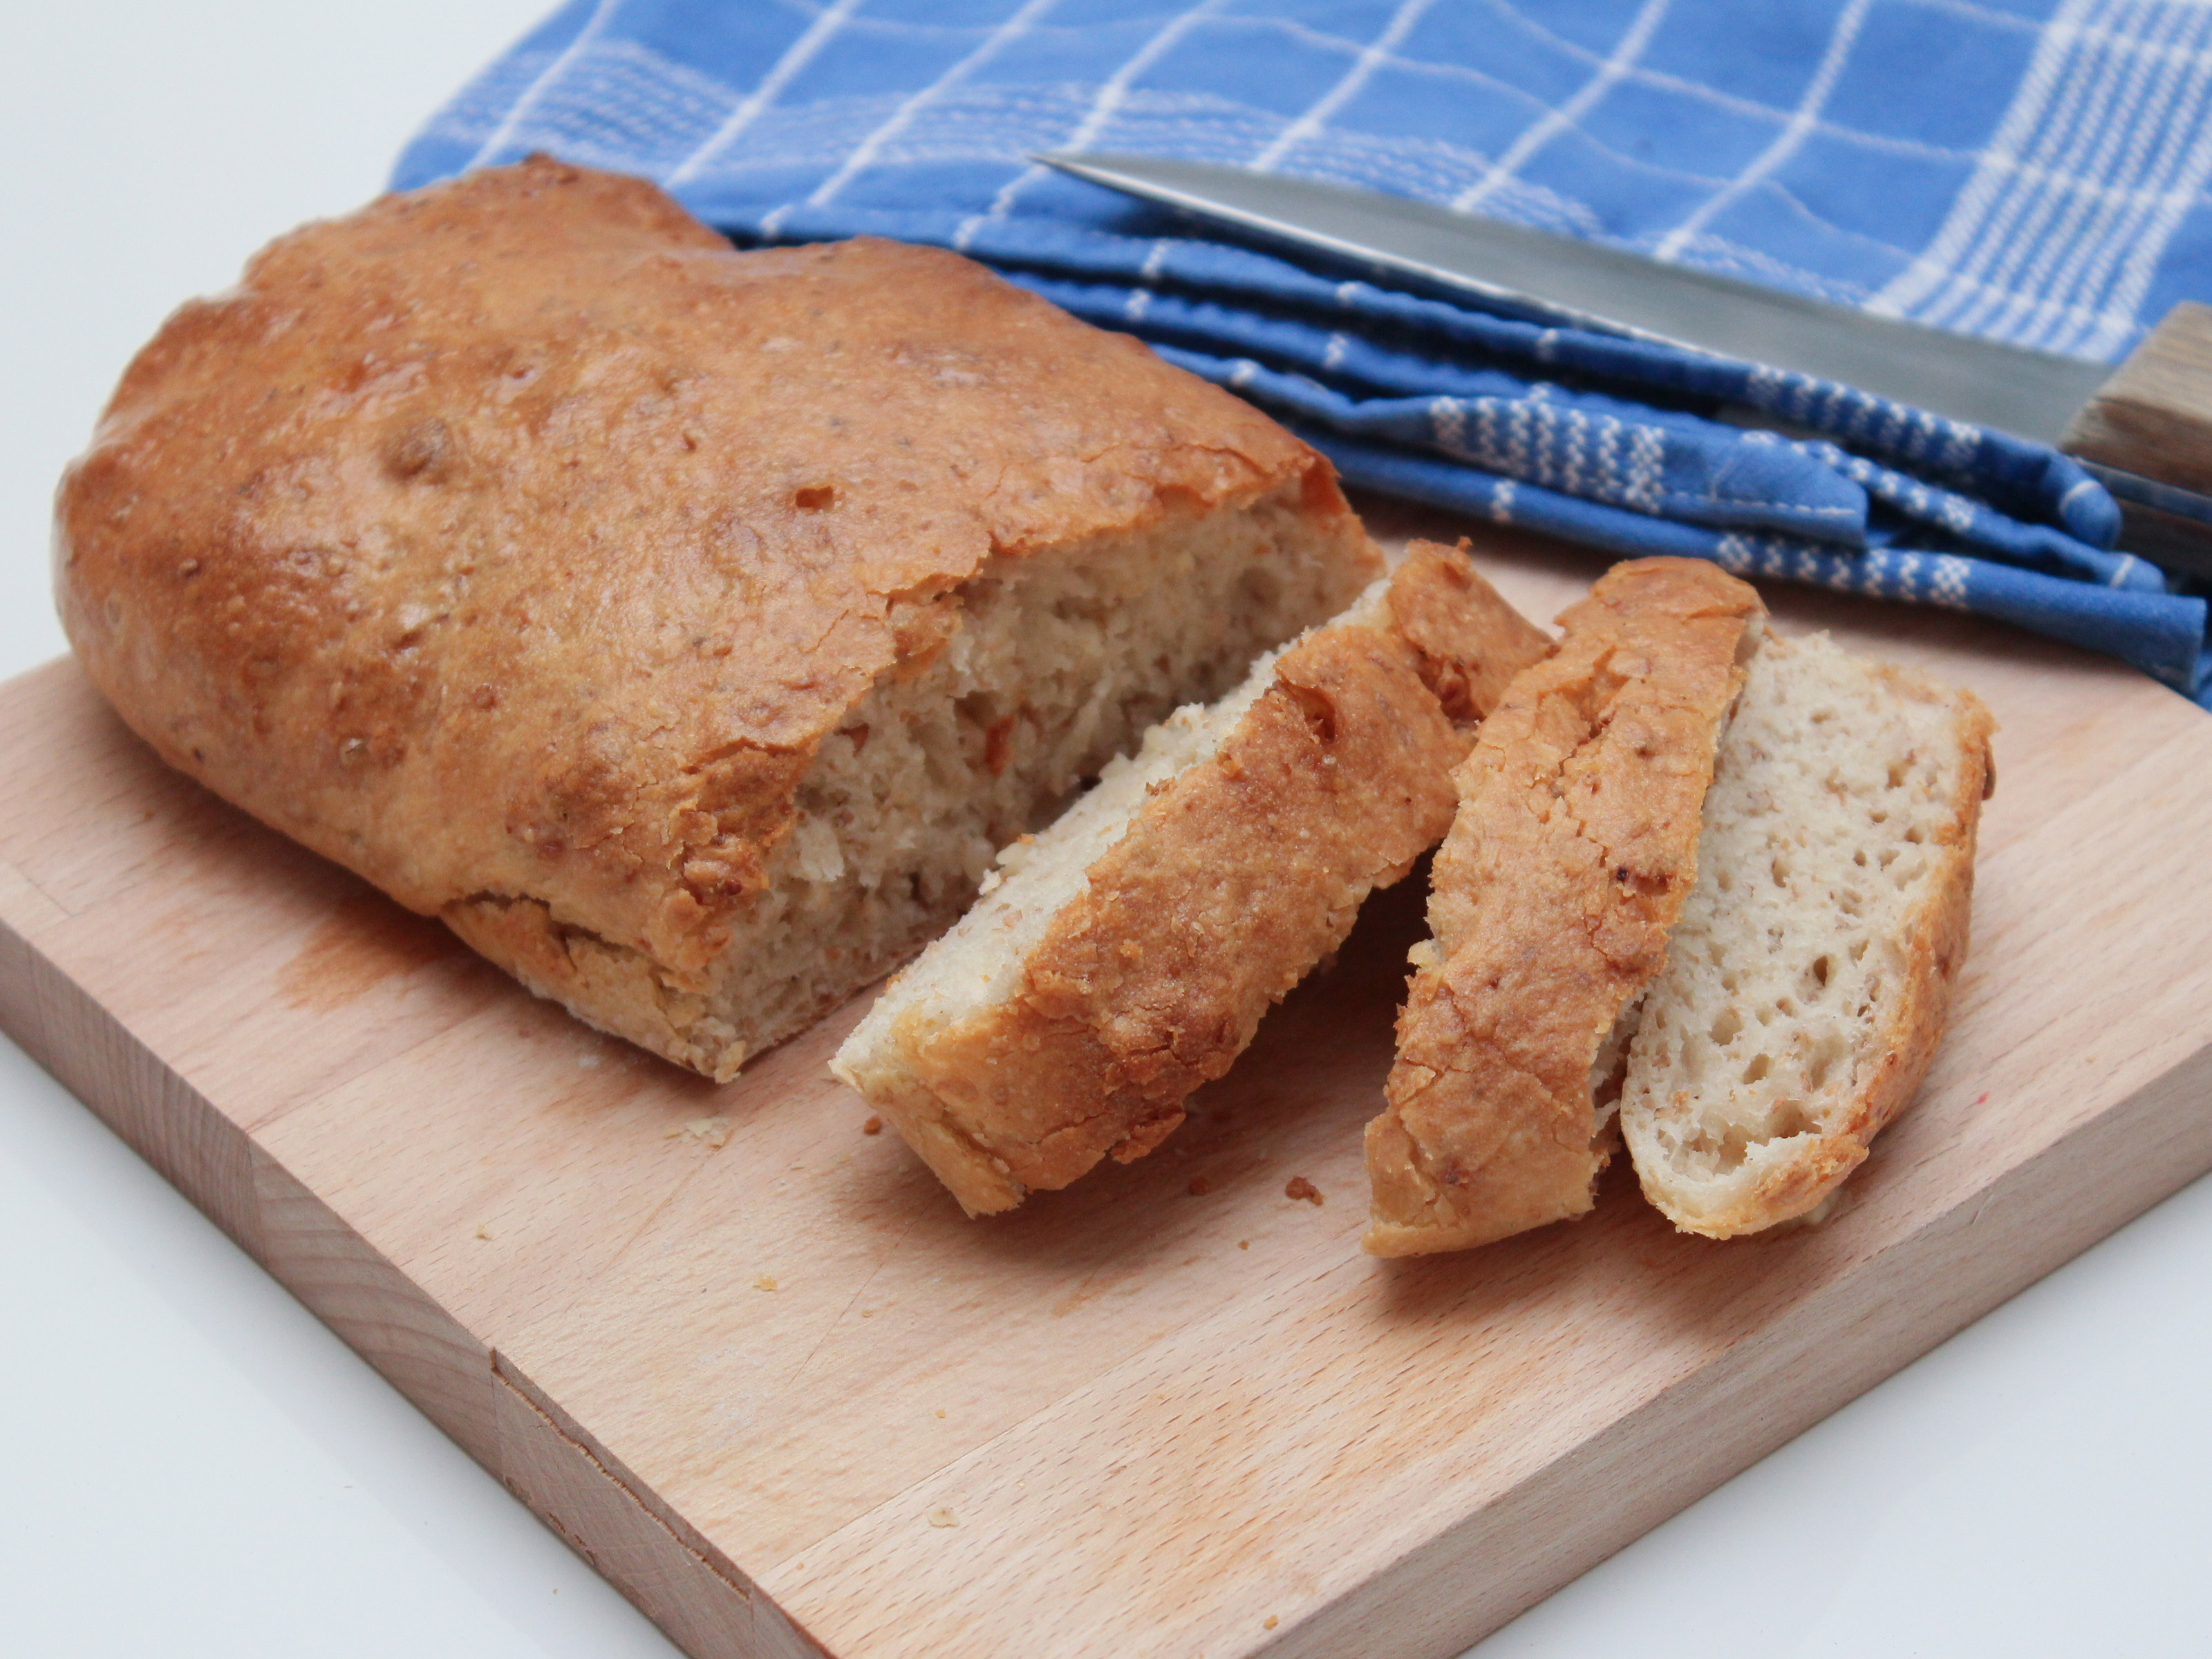 How to Bake Oatmeal Bread With Honey Using a Bread Machine